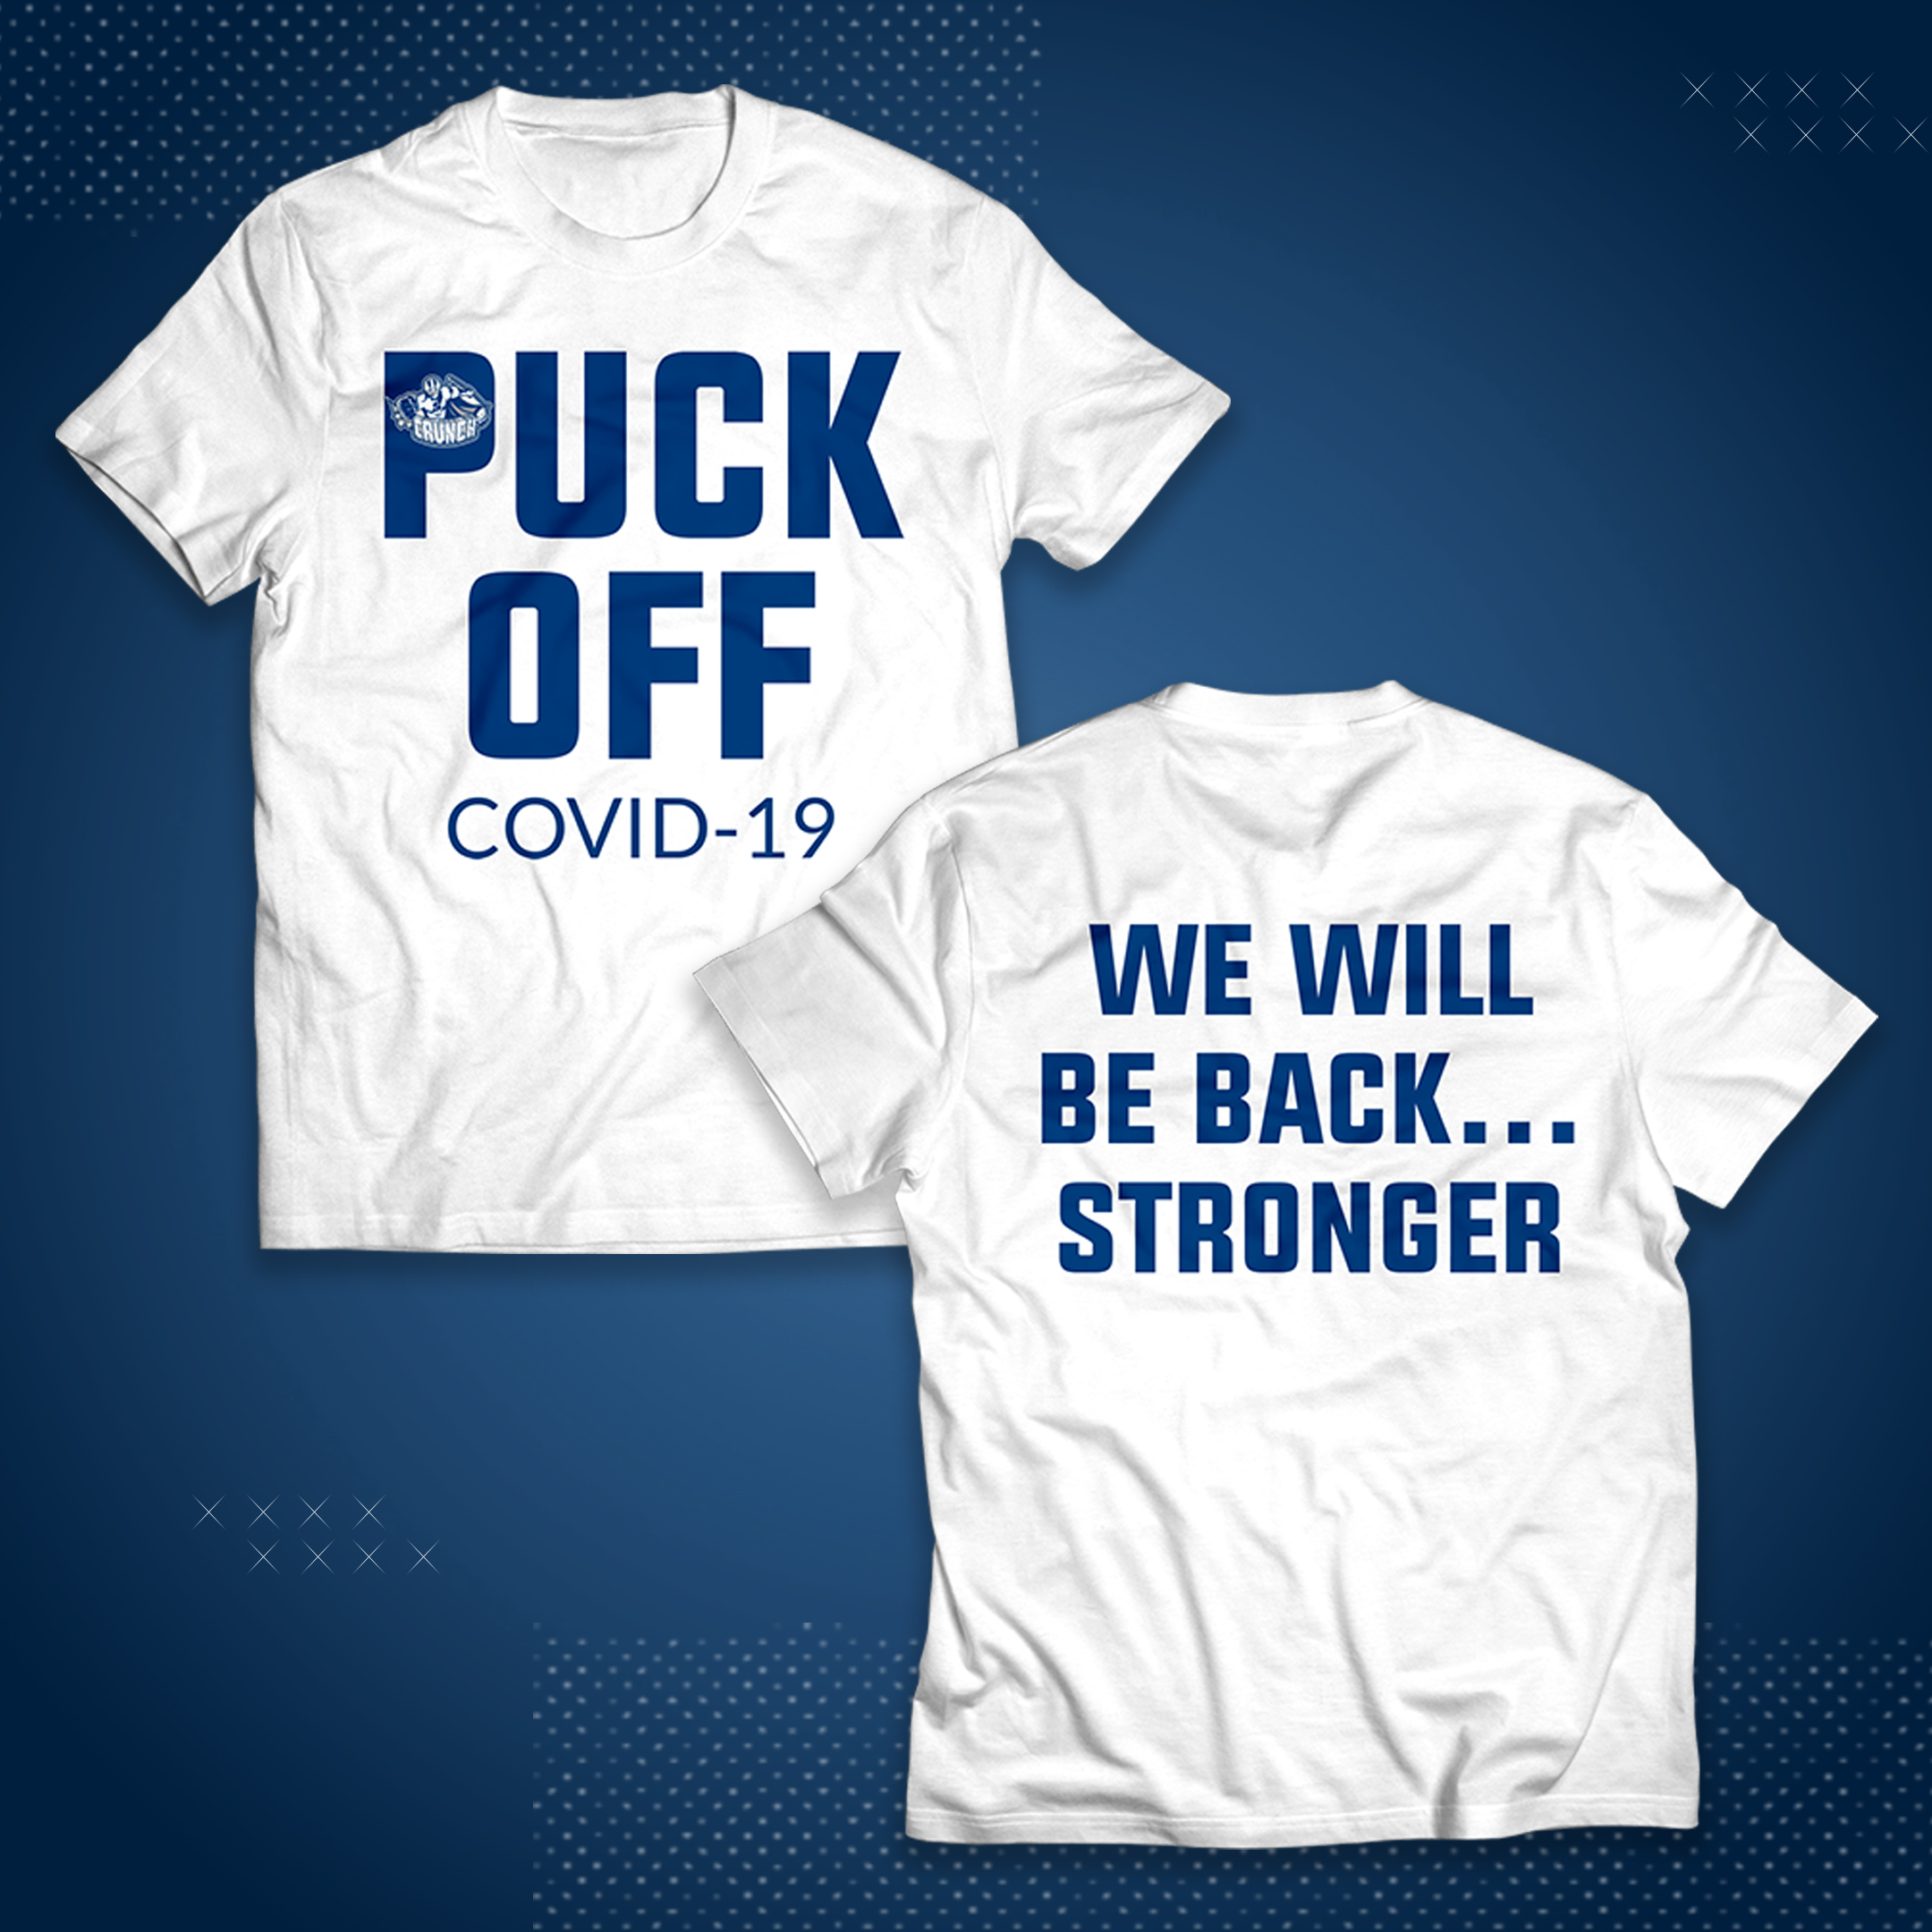 Syracuse Crunch selling T-shirts to 